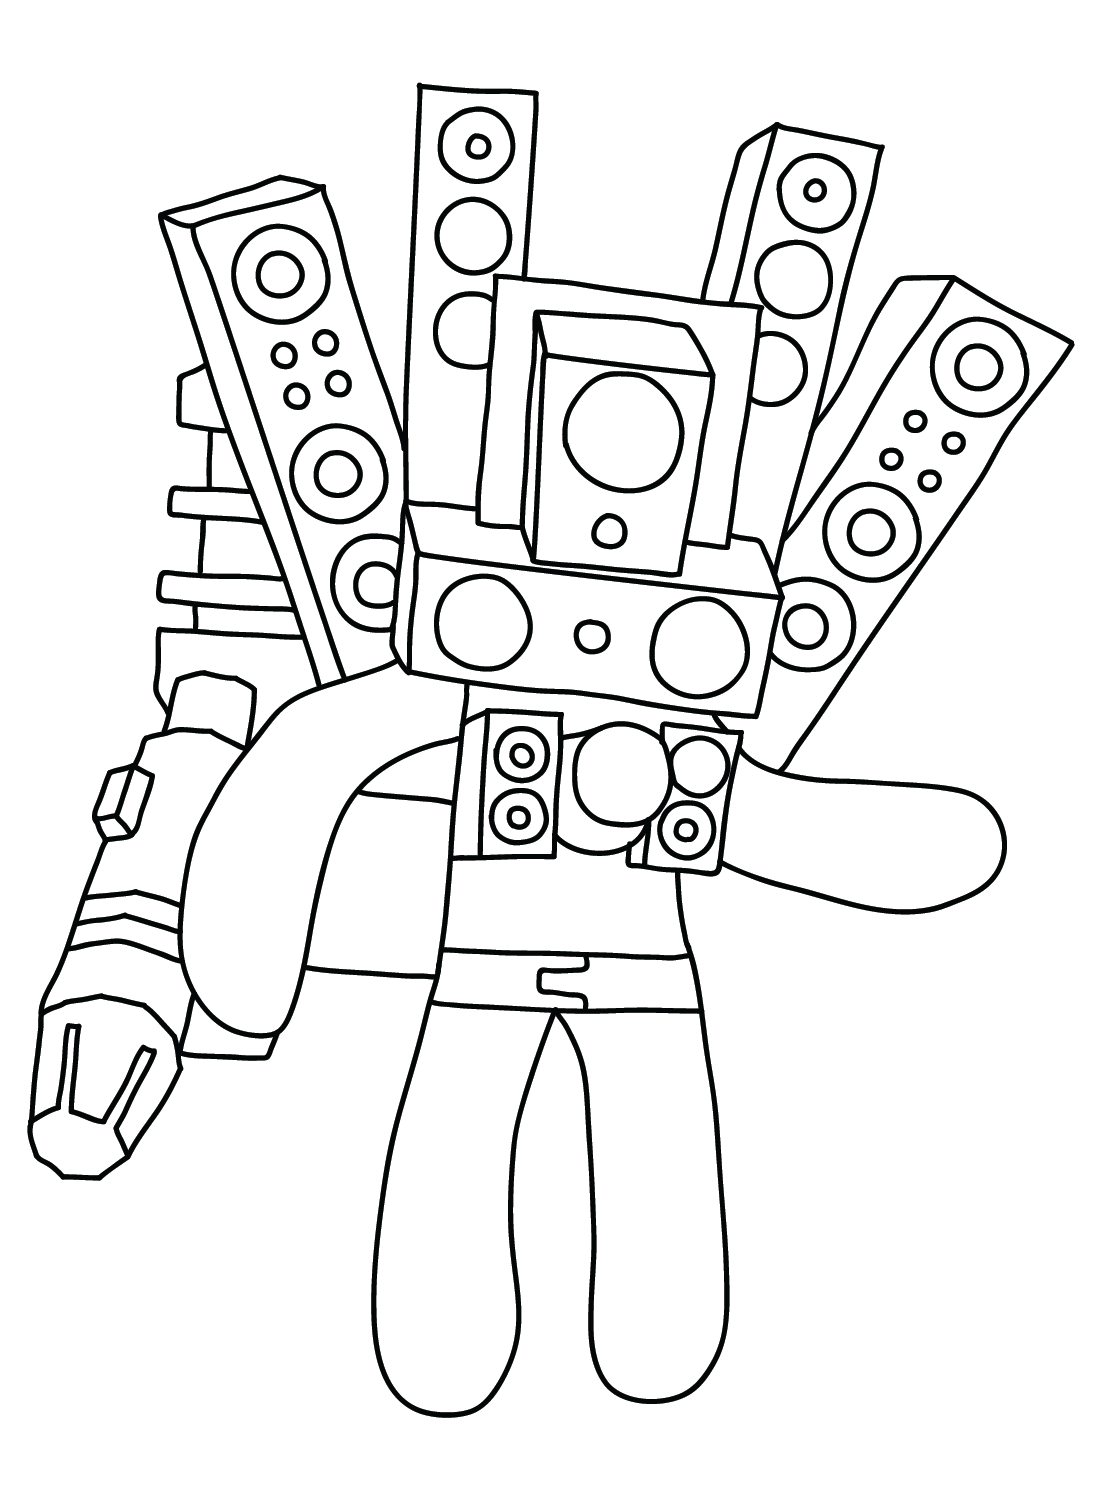 Titan Speakerman Coloring Pages to Print - Free Printable Coloring Pages